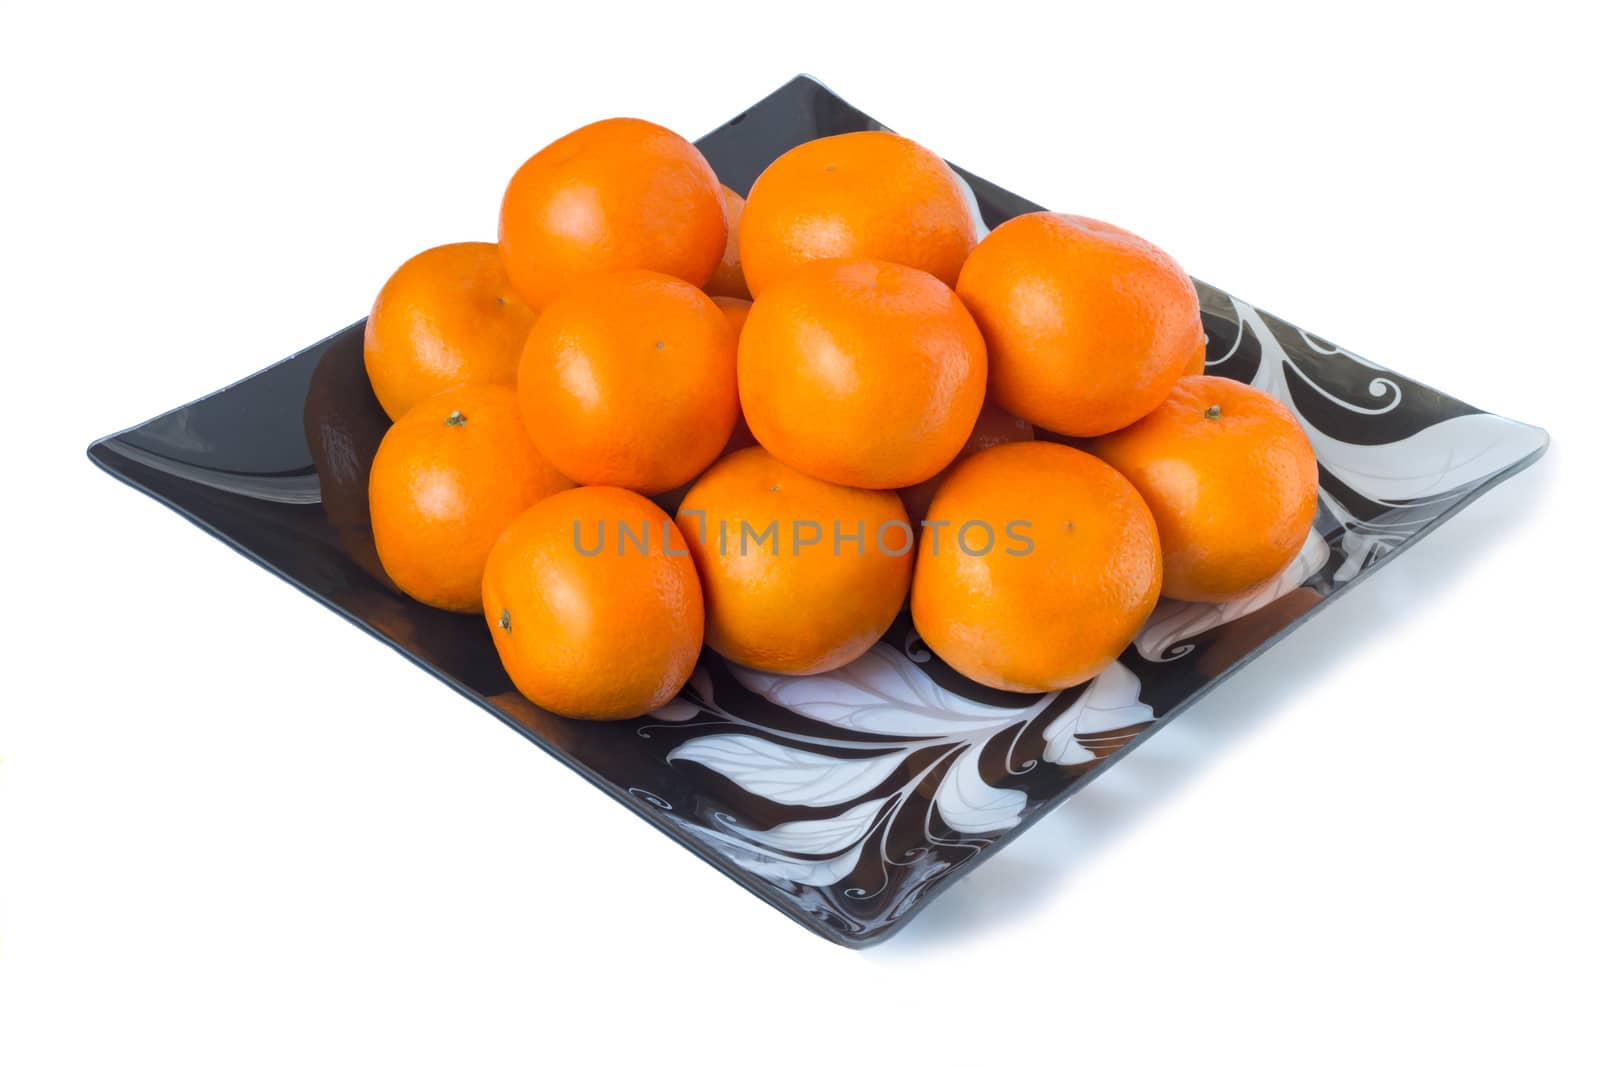 Large ripe tangerines in a glass dish on a white background. by georgina198